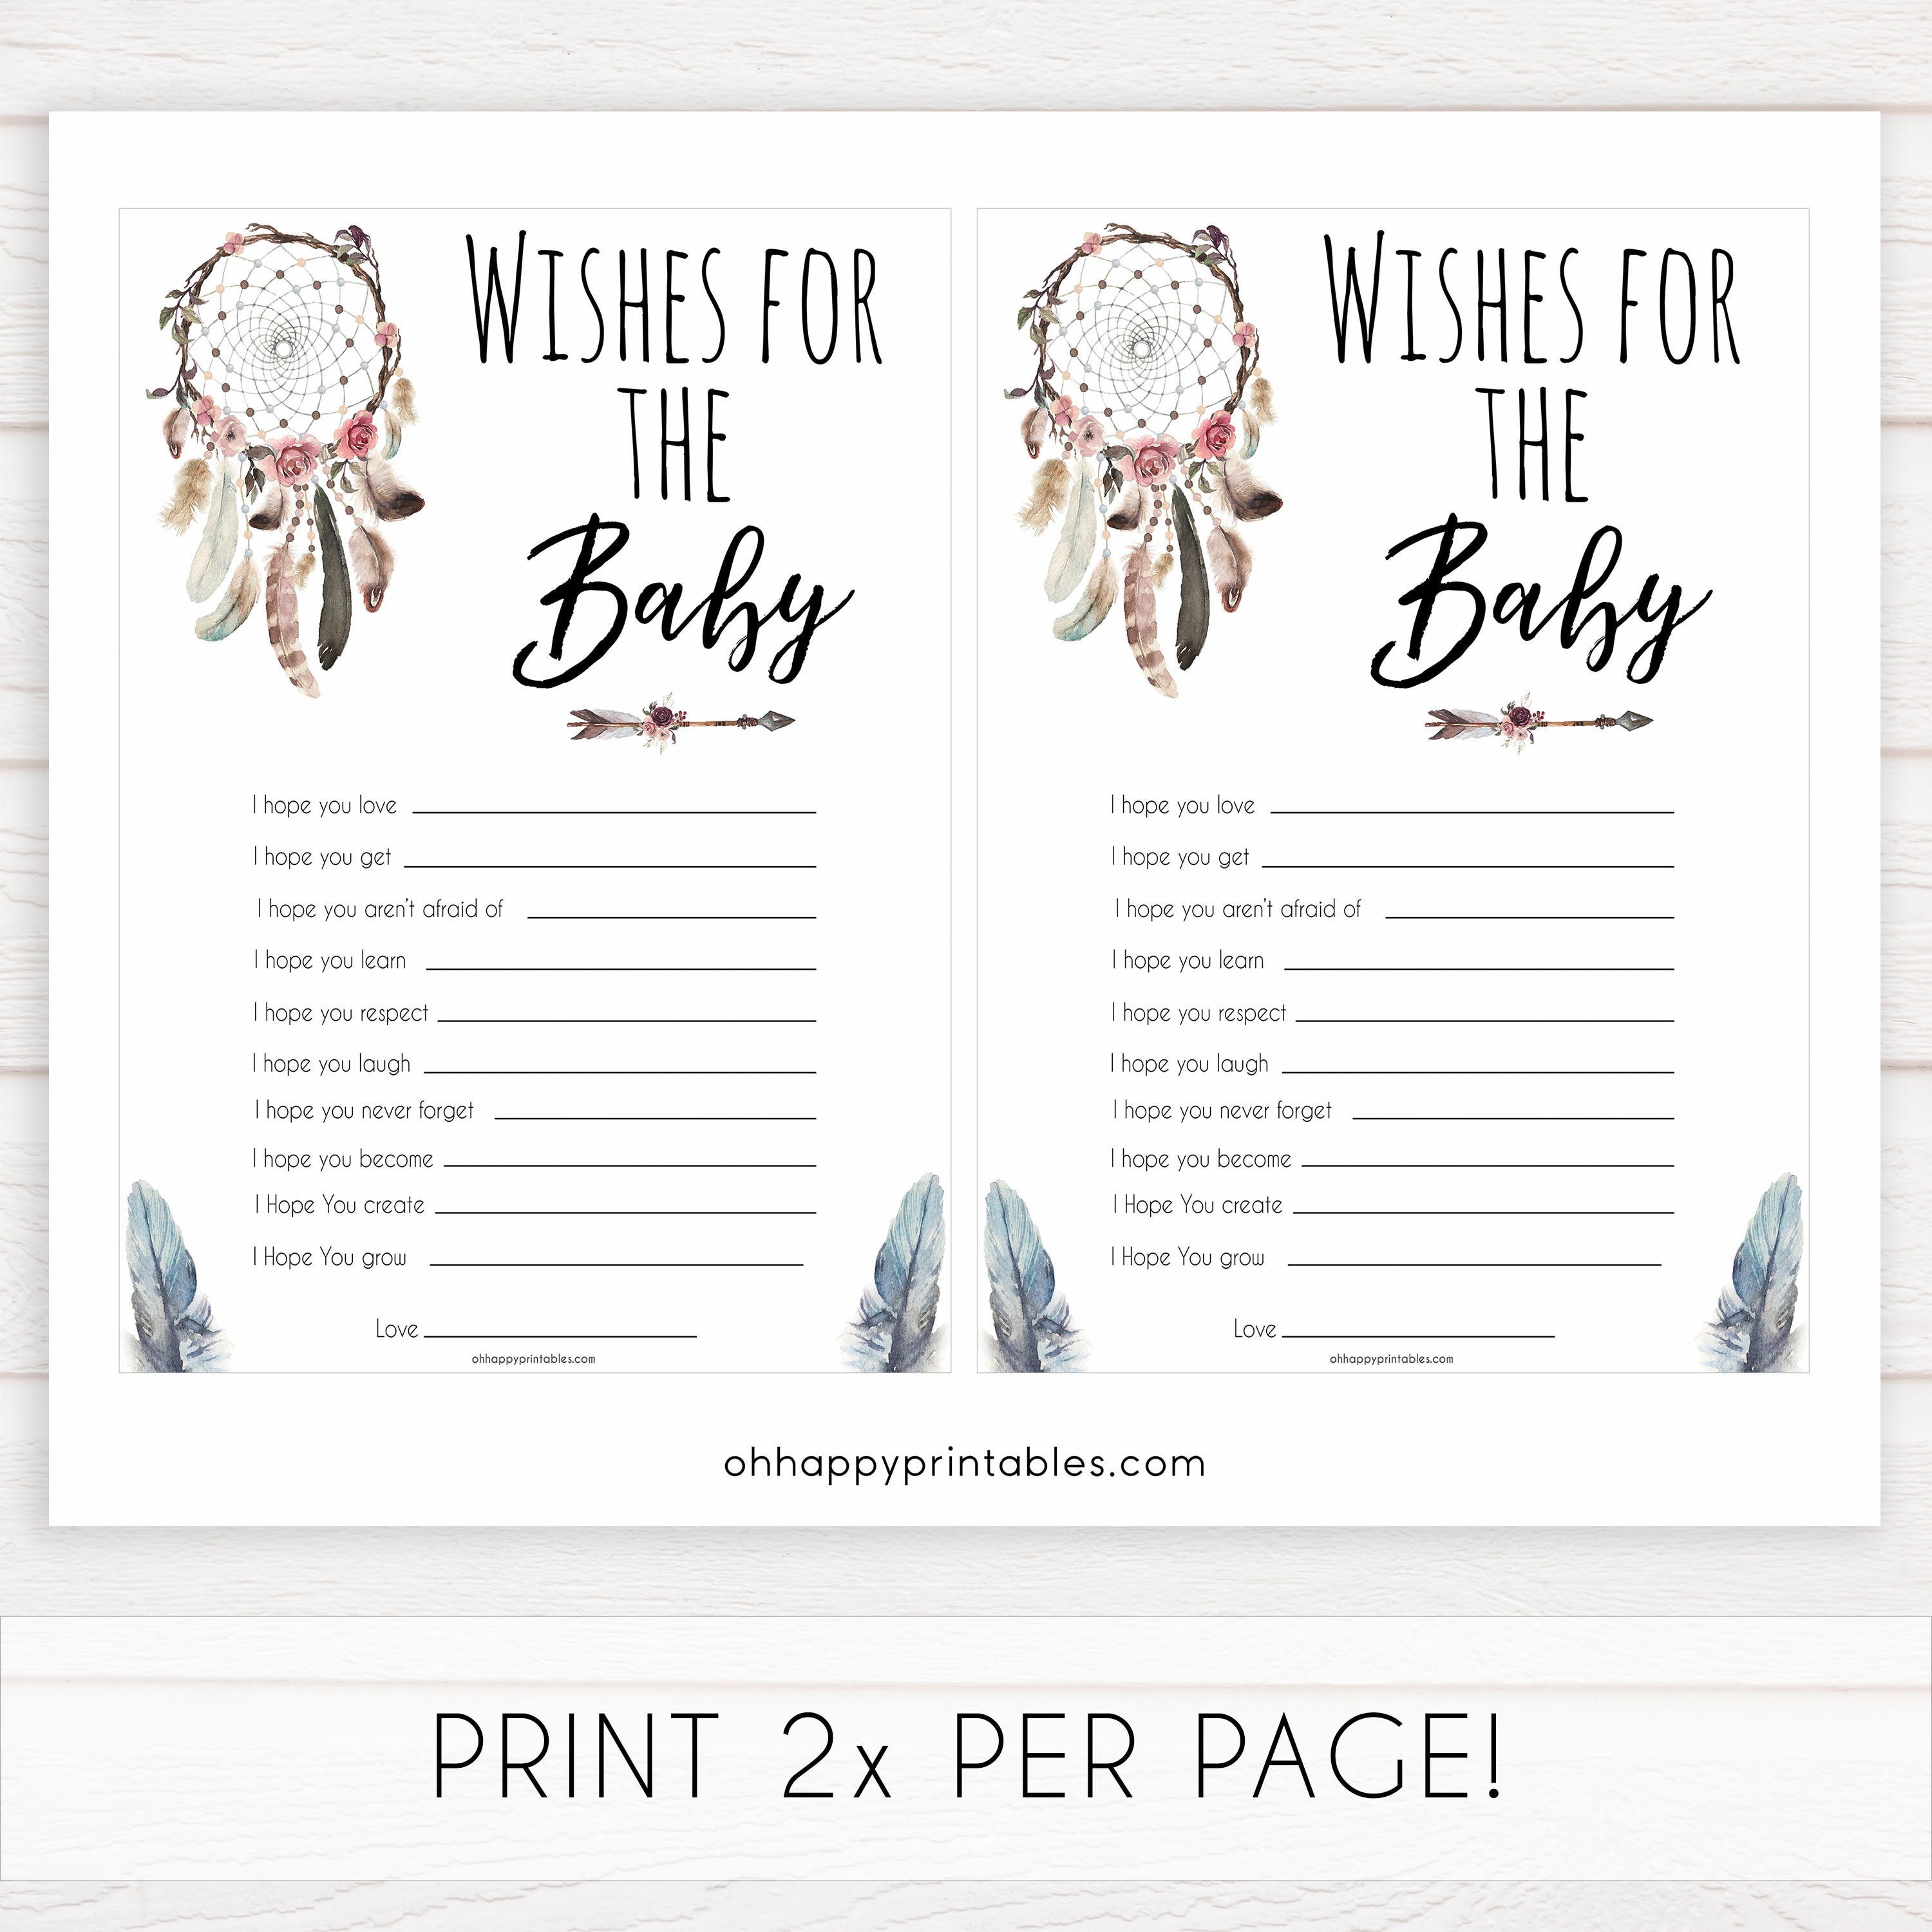 Boho baby games, wishes for the baby baby game, fun baby games, printable baby games, top 10 baby games, boho baby shower, baby games, hilarious baby games